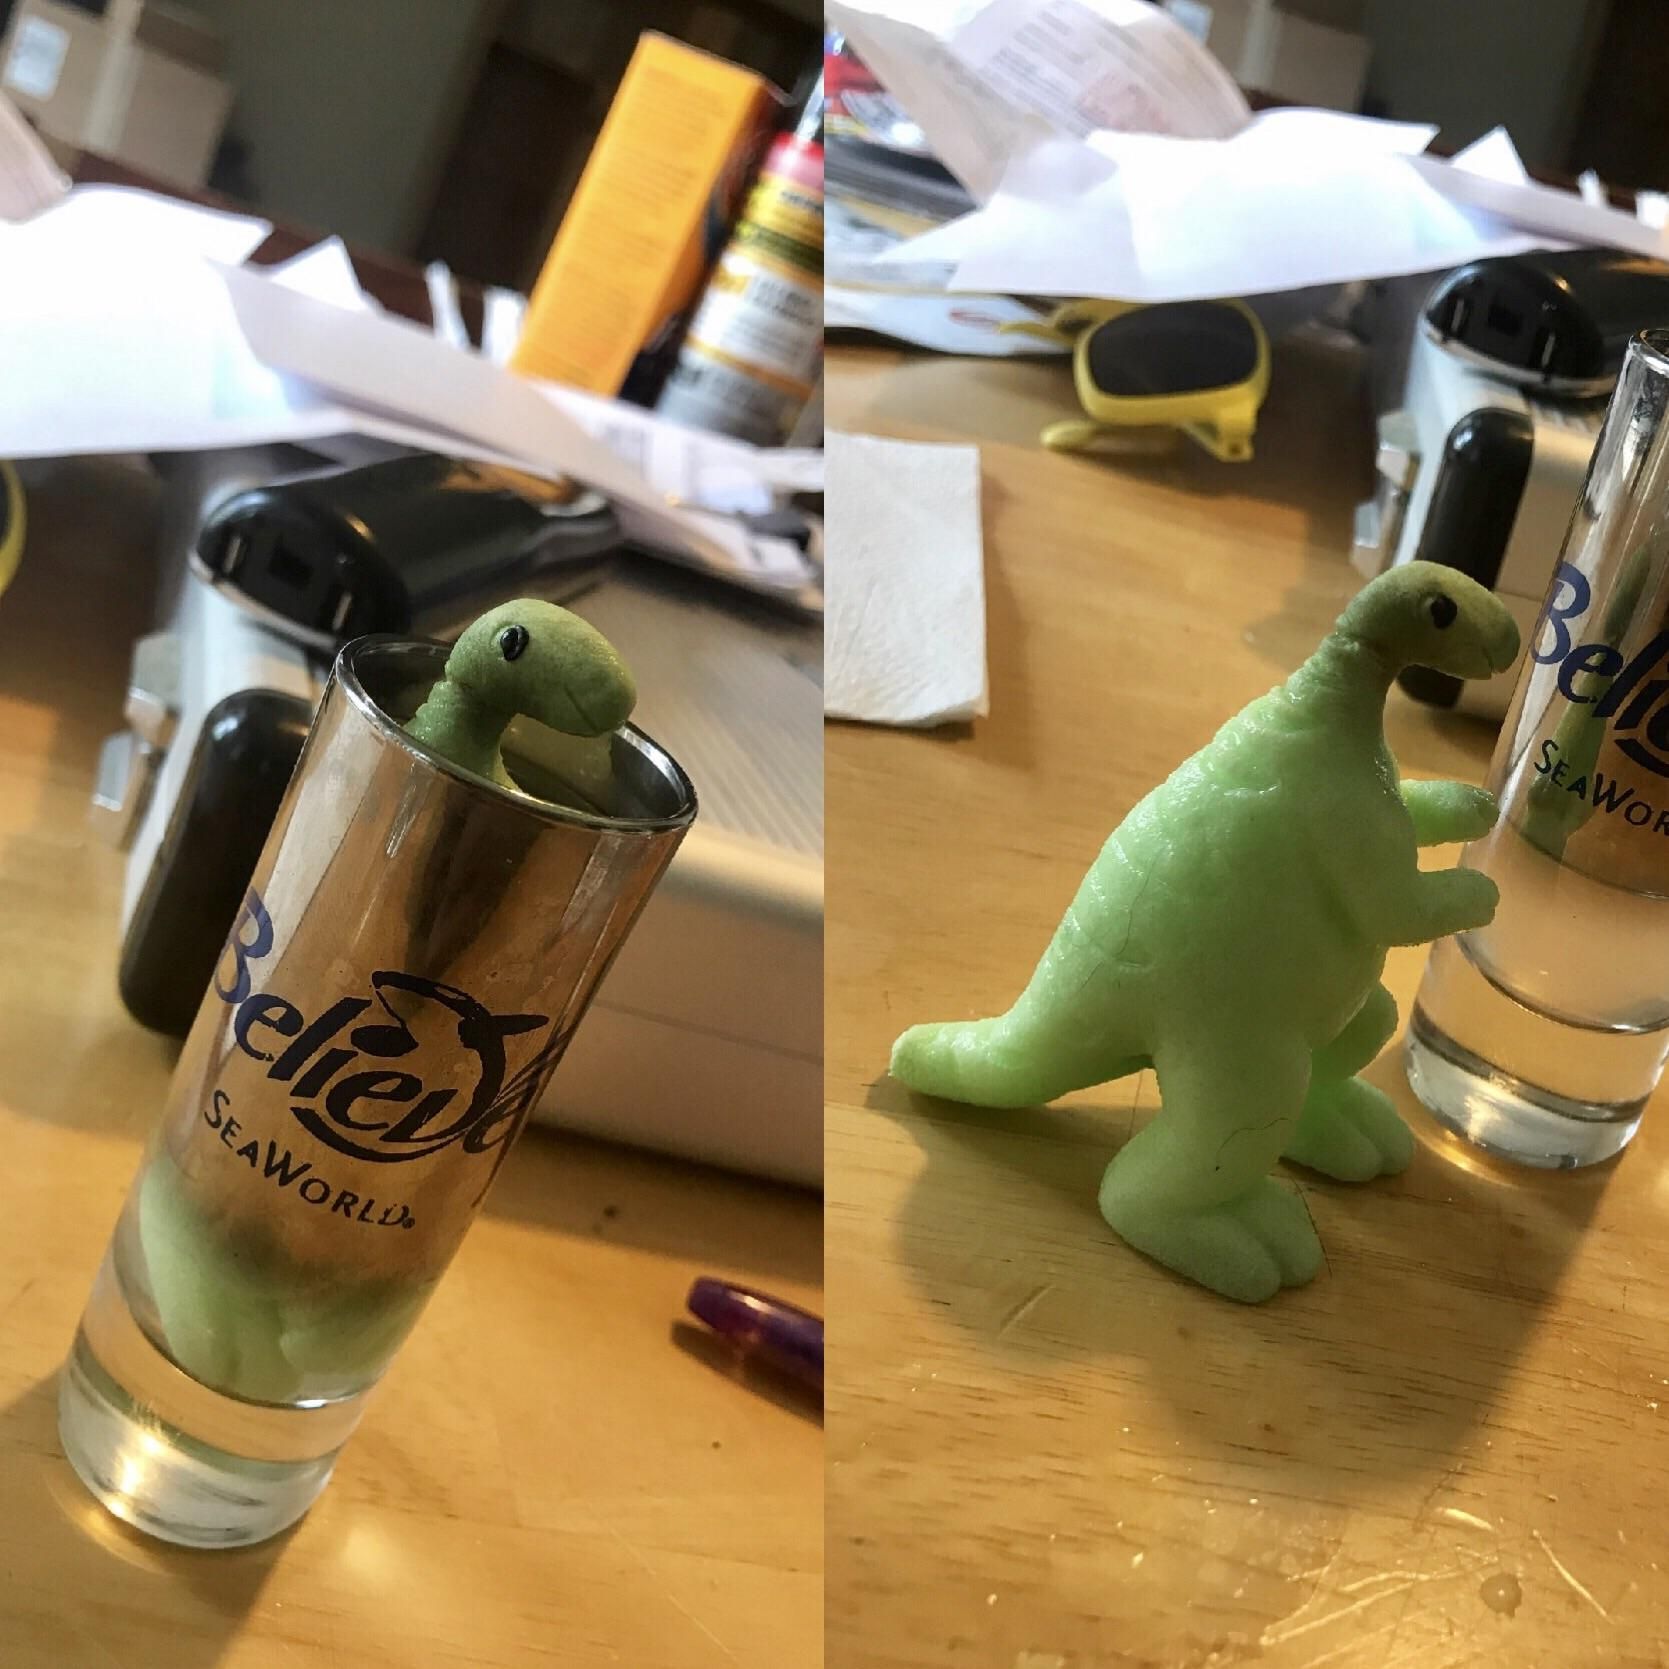 I put my nephew's "grow in water" dinosaur in a tall shot glass, I'm pleased with the results